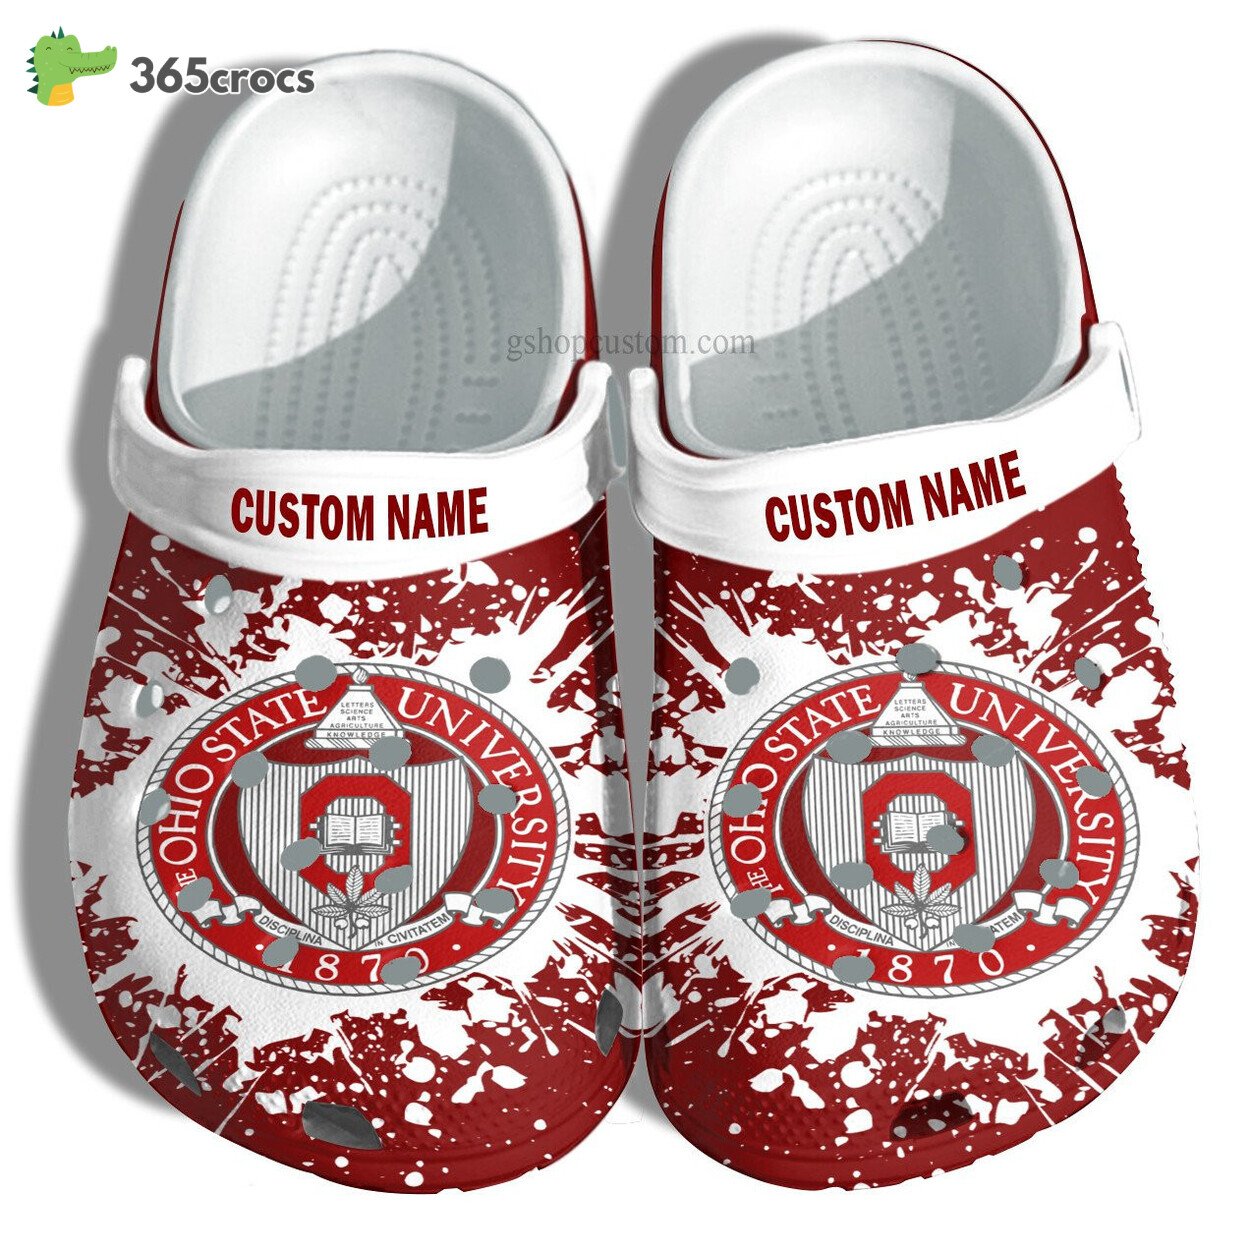 The Ohio State University Graduation Gifts Croc Shoes Customize Admission Gift Shoes